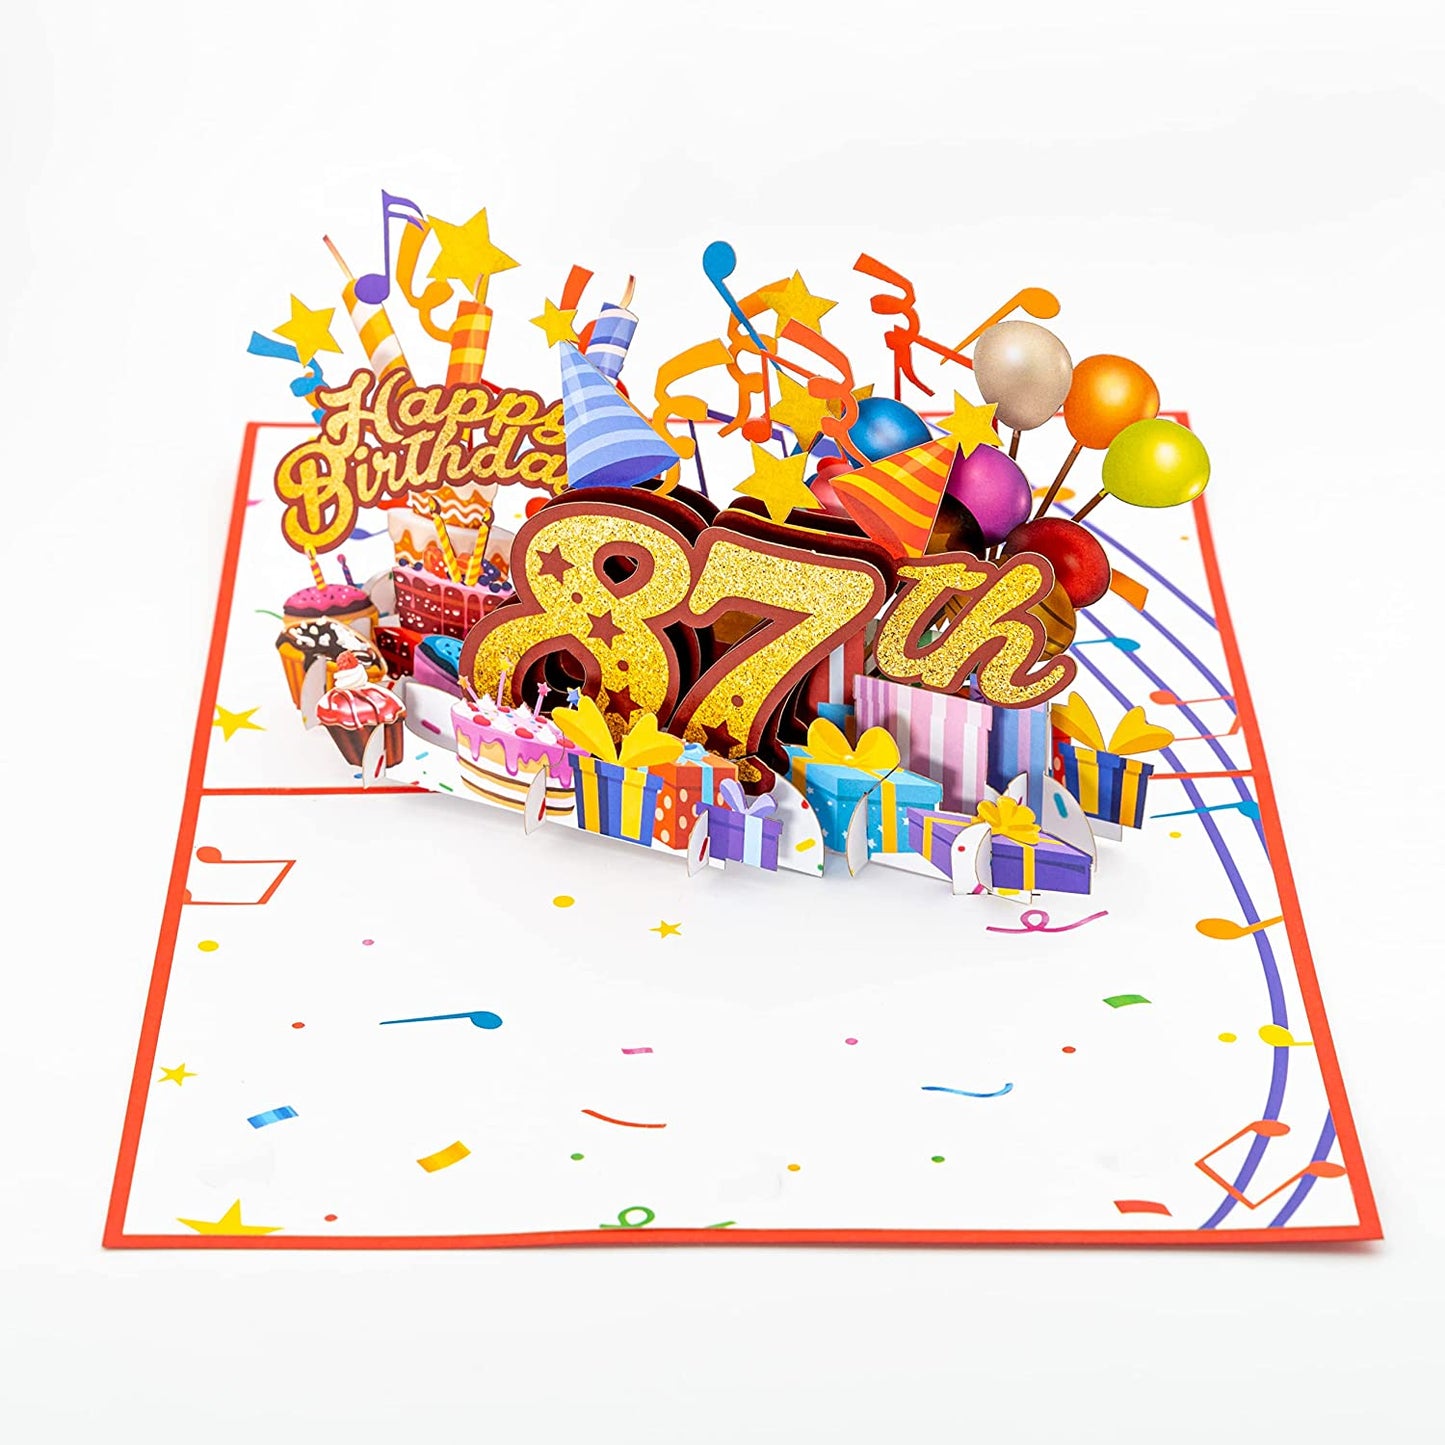 Happy 87th Red Birthday 3D Pop Up Greeting Card - Birthday - Happy Birthday - new arrival - iGifts And Cards